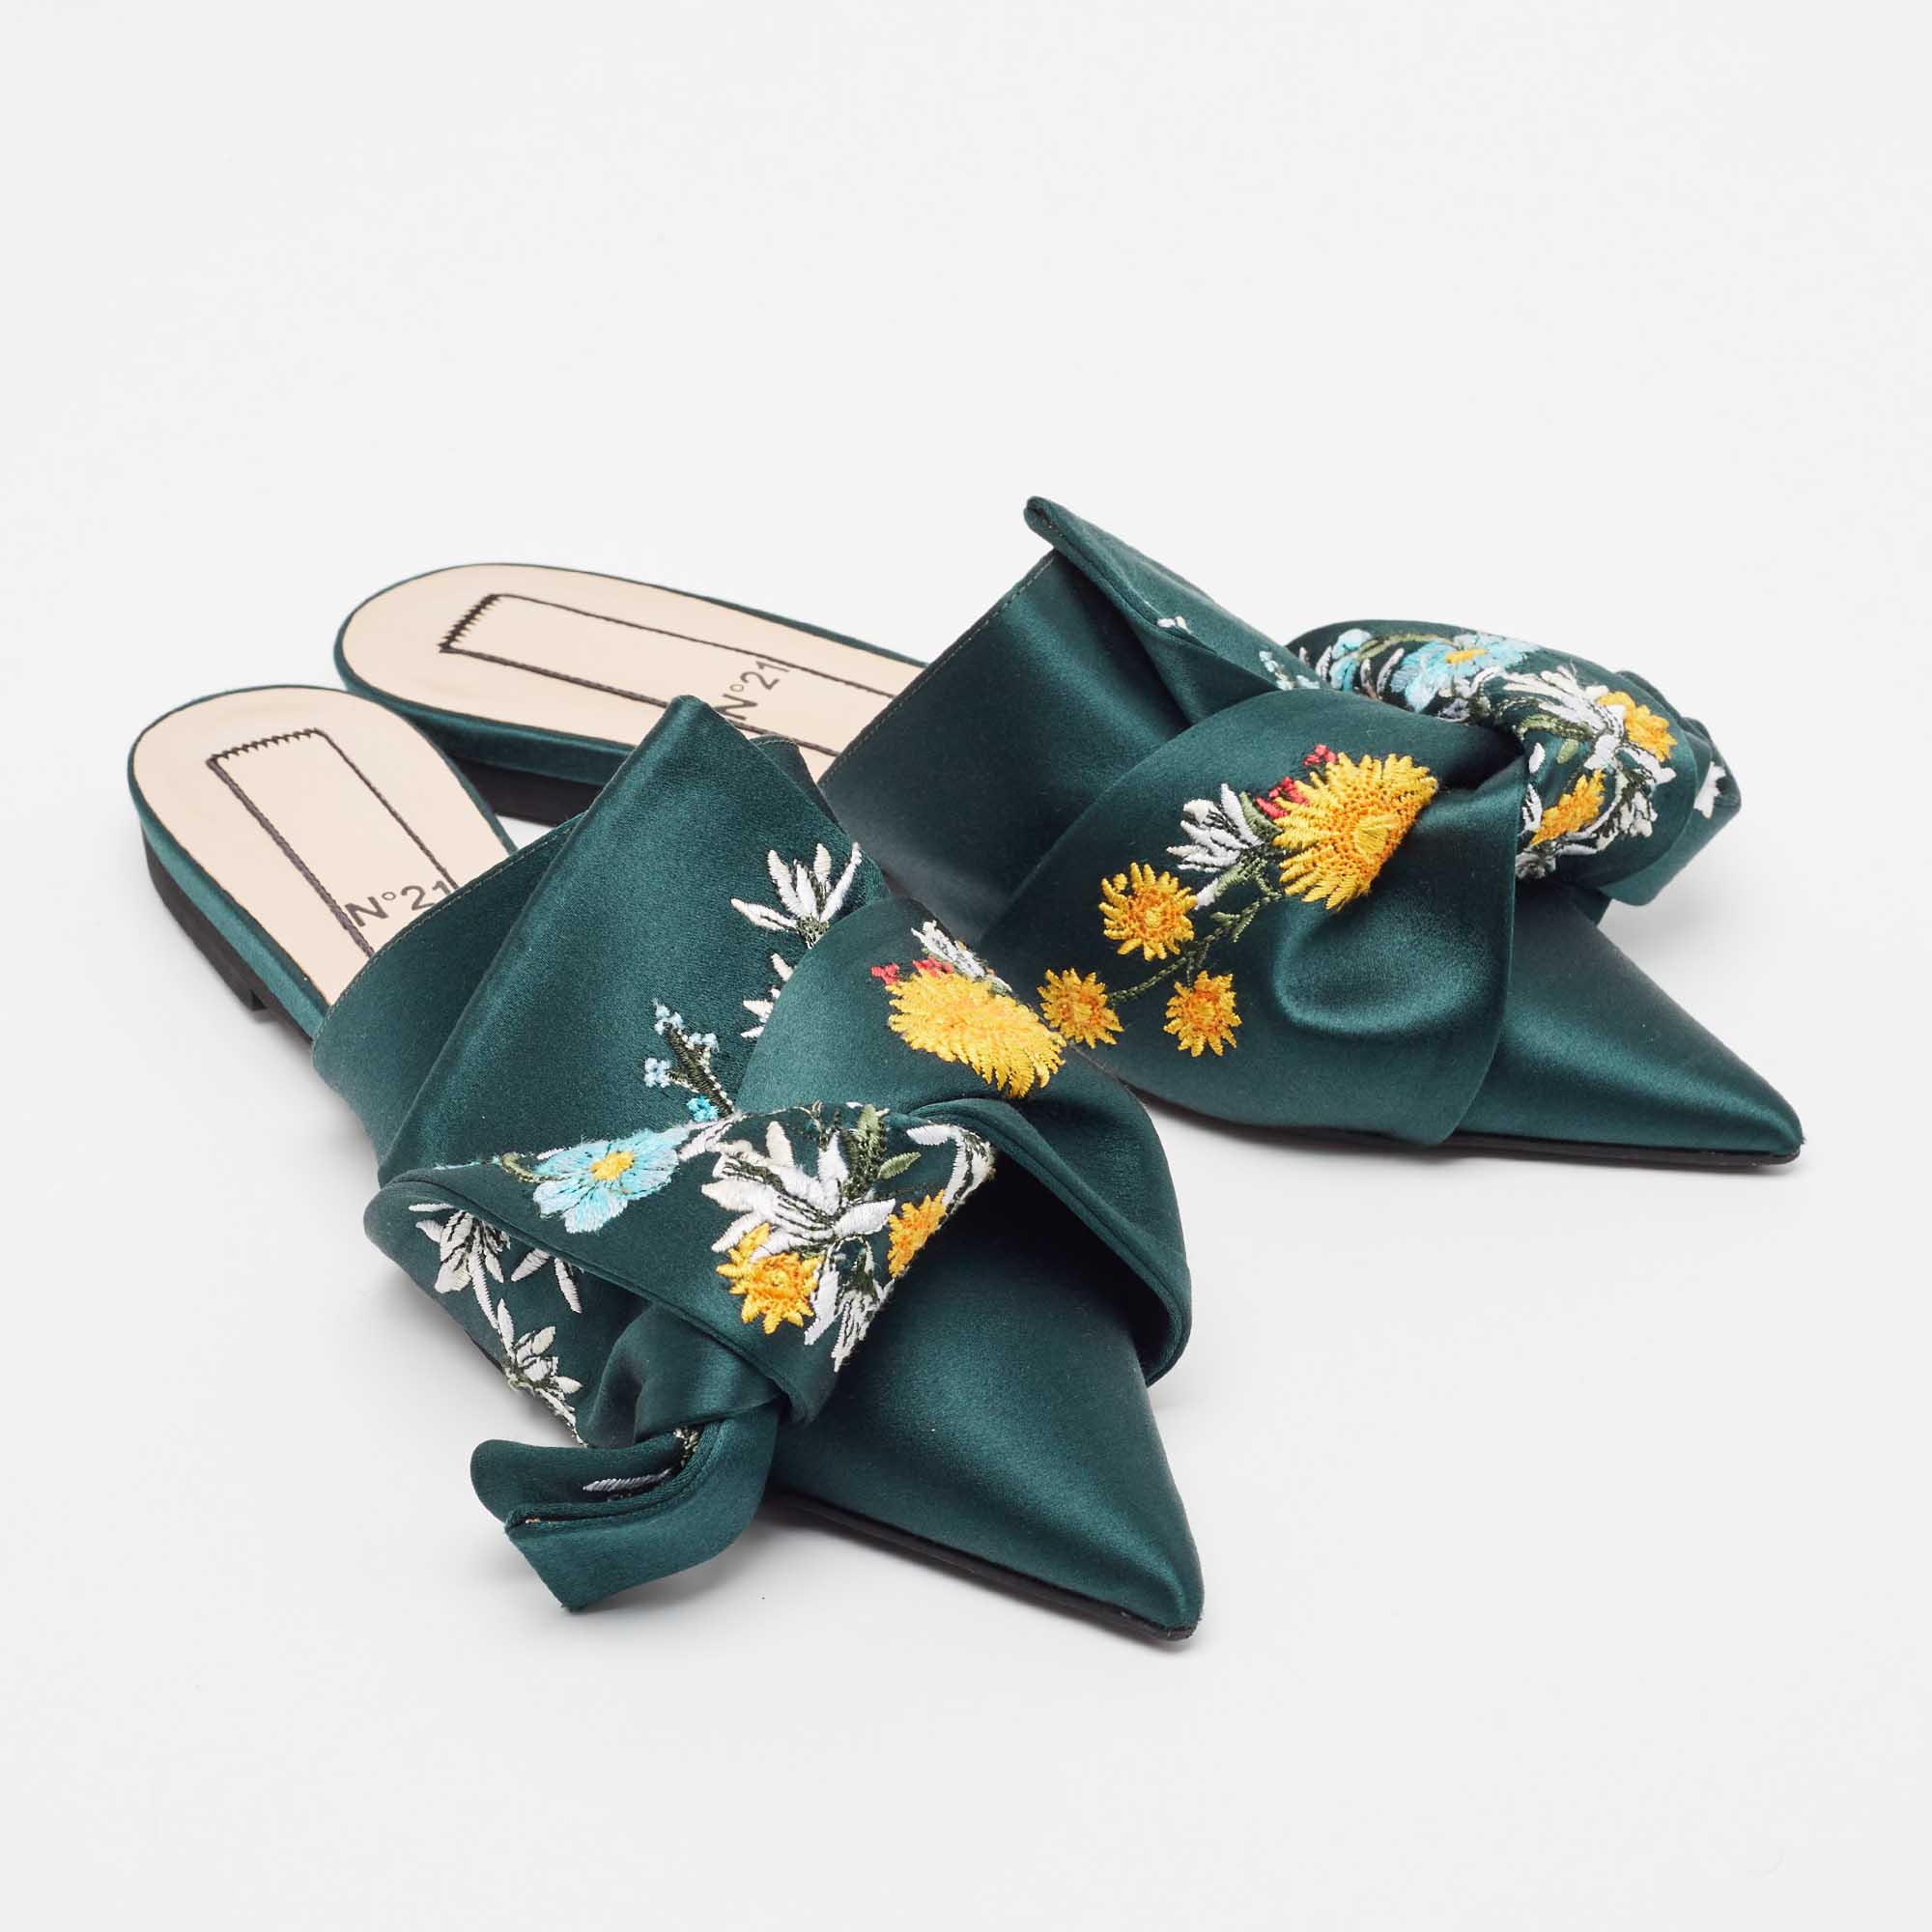 N21 Green Satin Floral Embroidered Knot Flat Slides Size 36